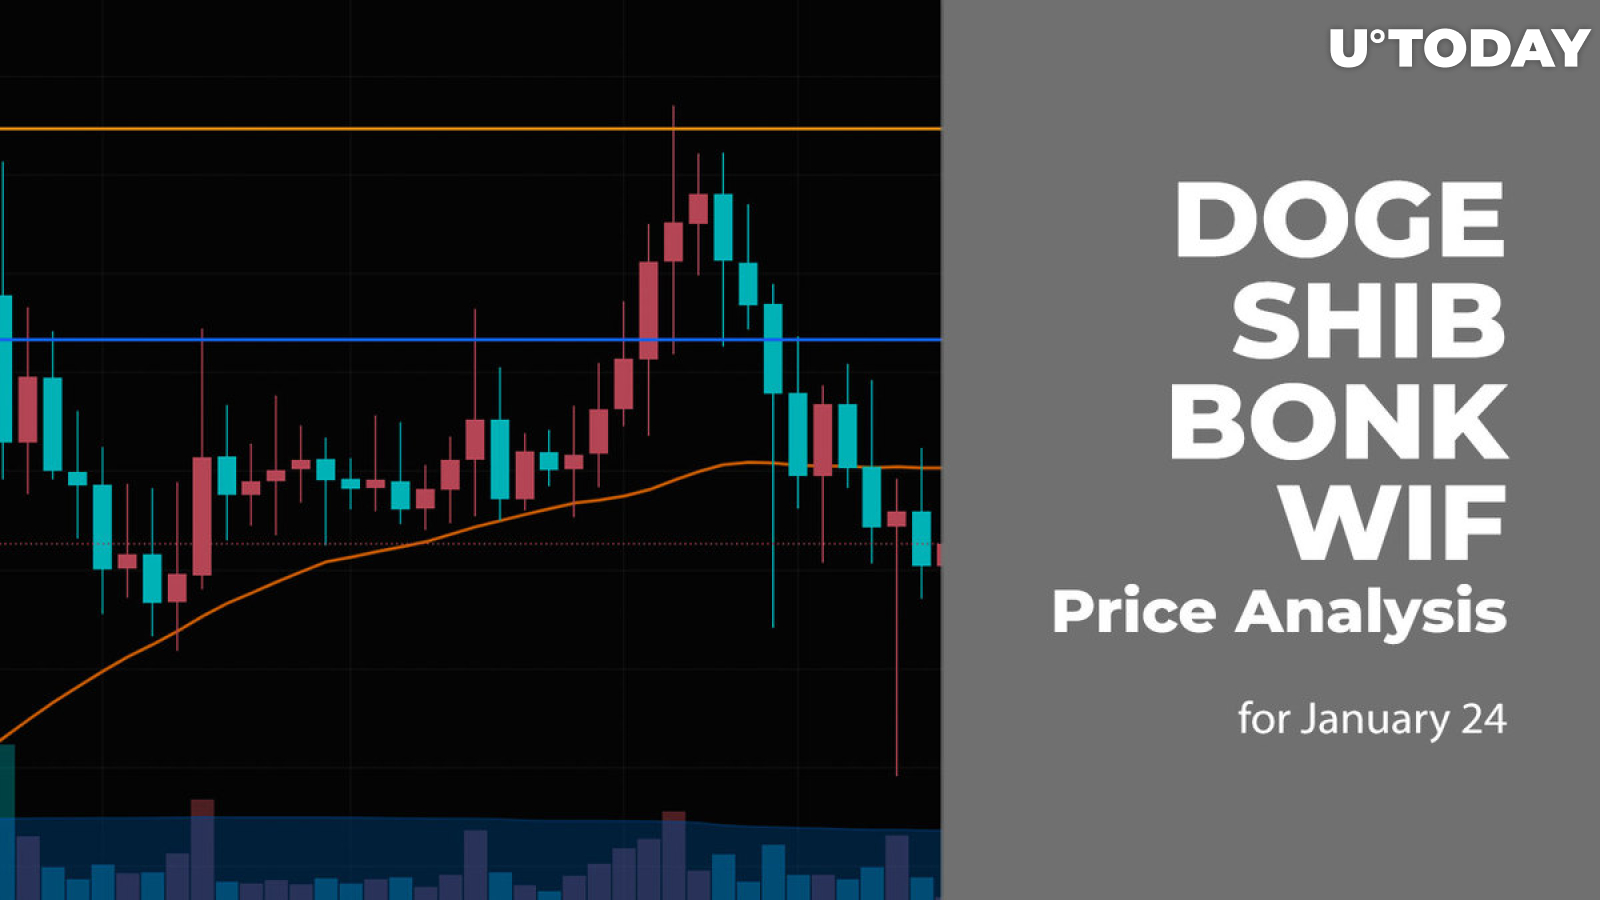 DOGE, SHIB, BONK and WIF Price Analysis for January 24